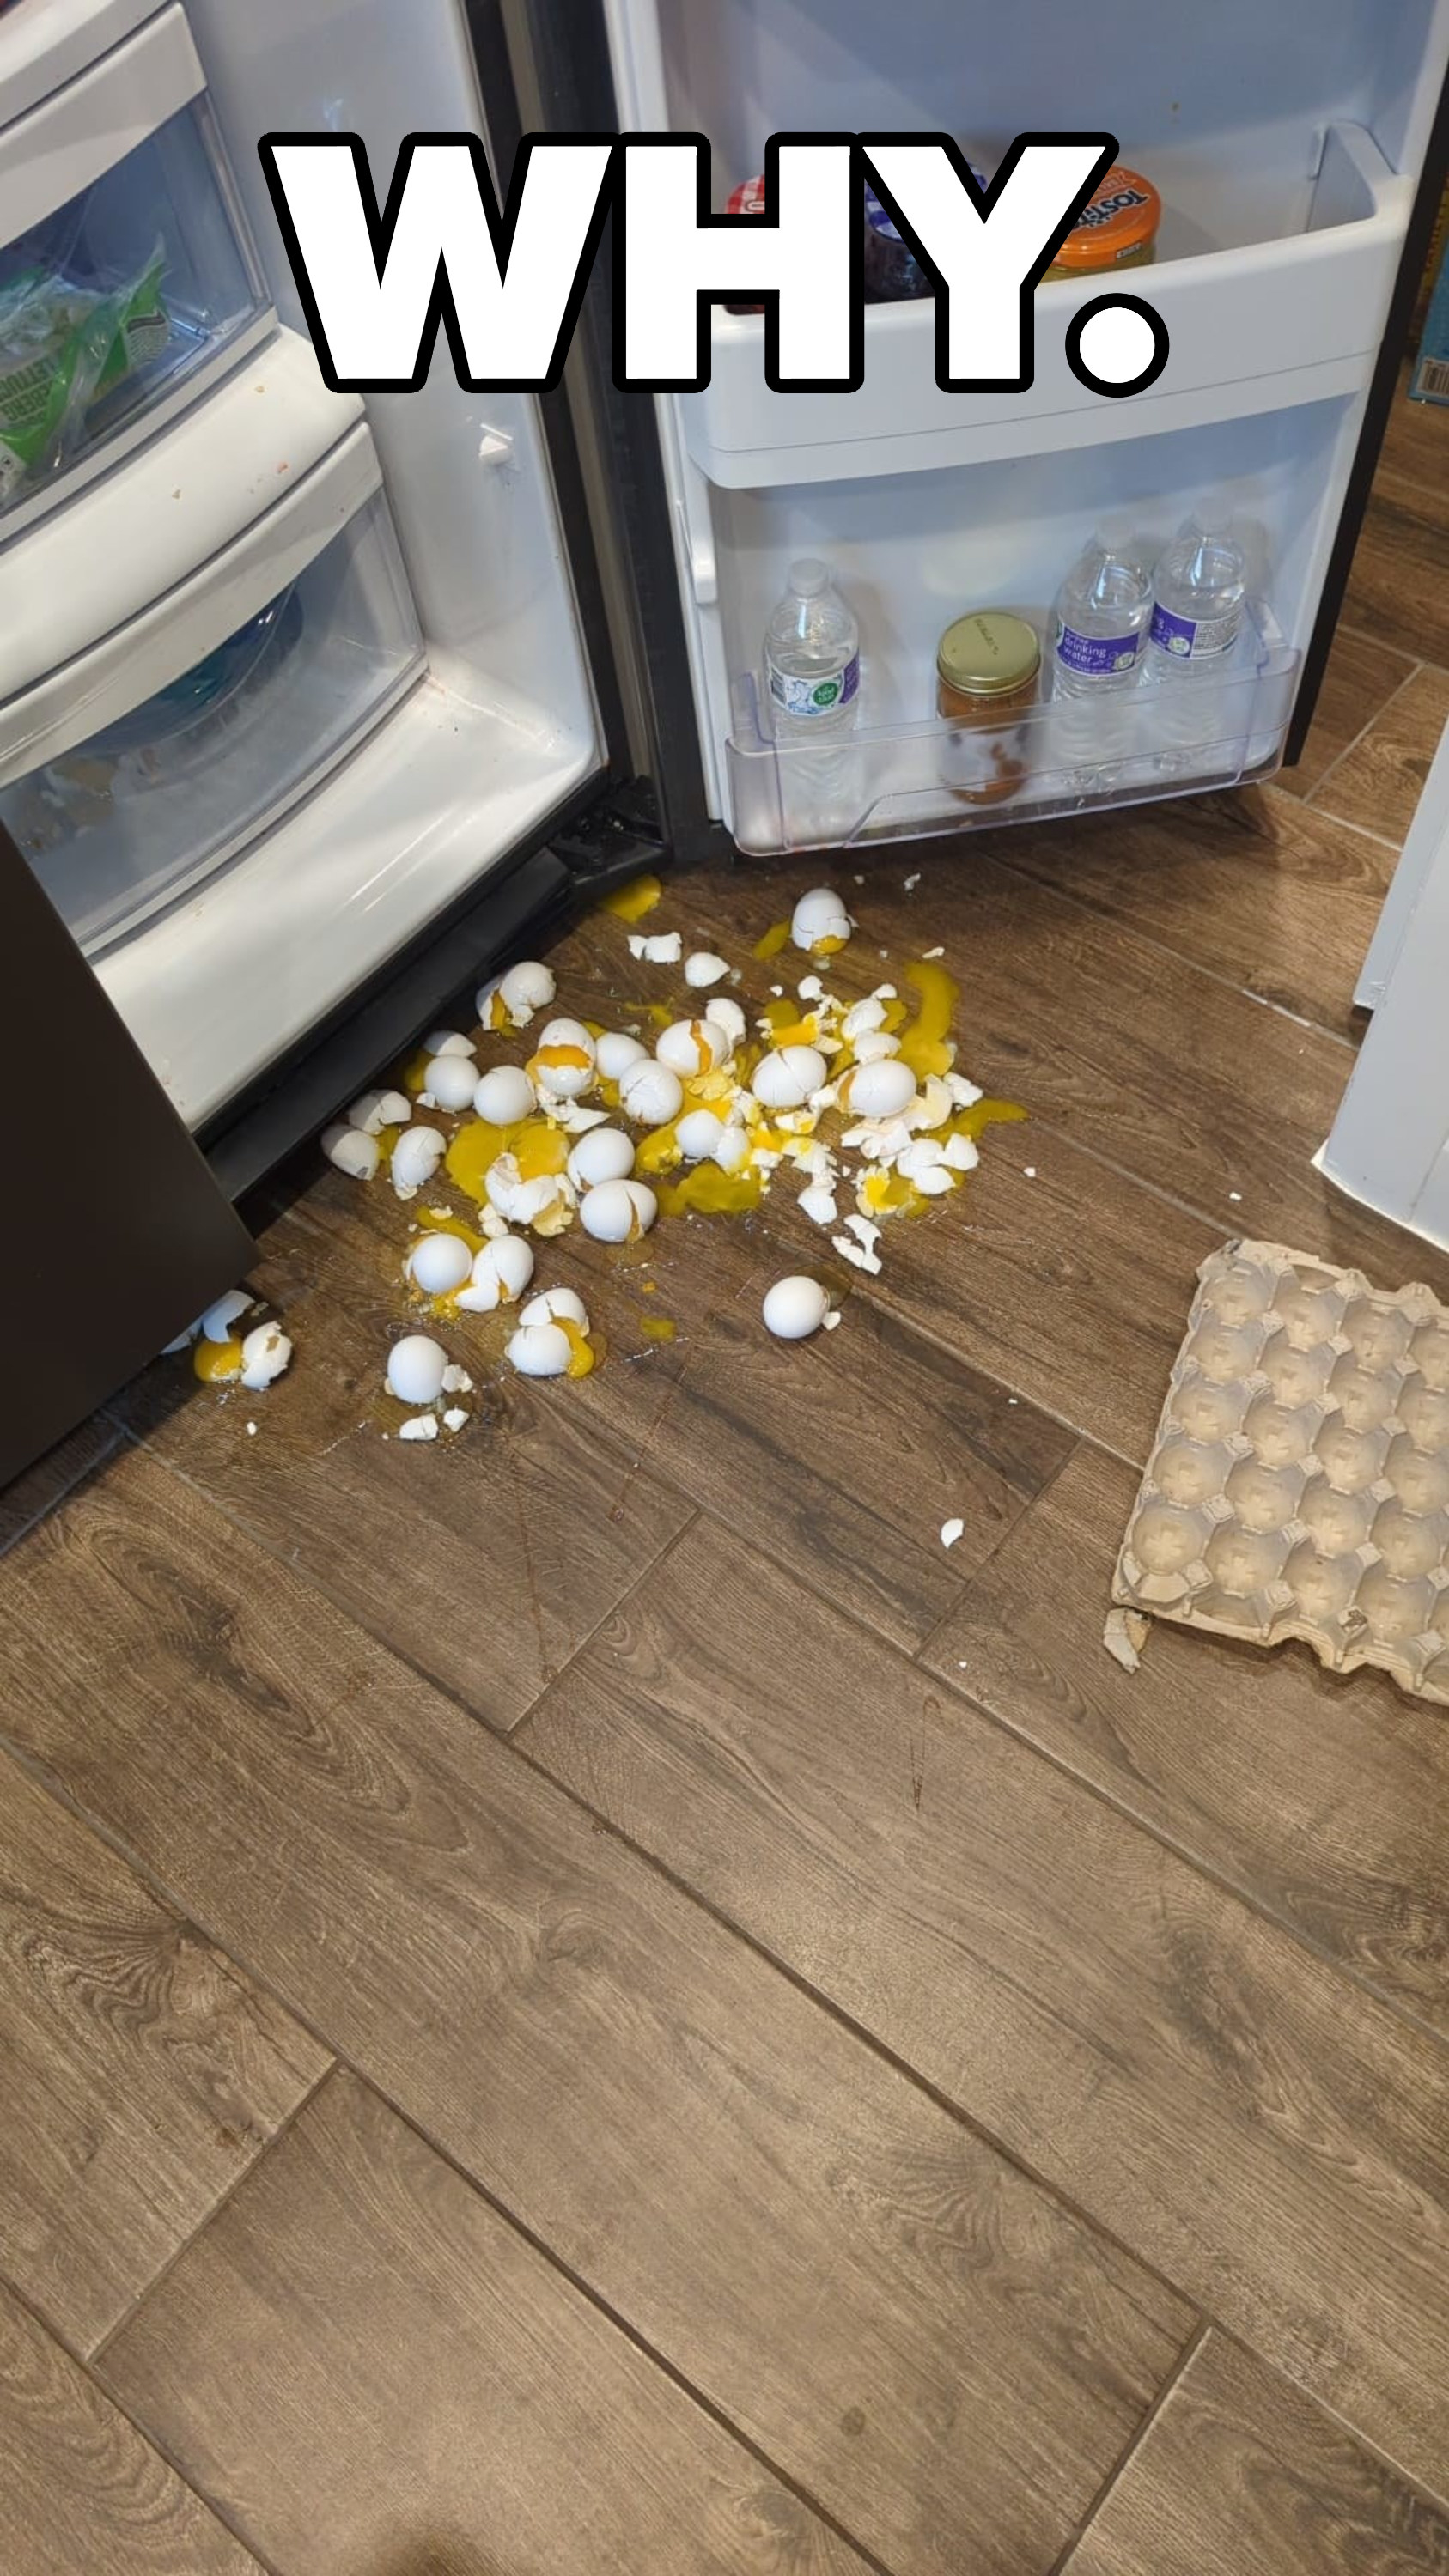 Dropped eggs in front of an open refrigerator